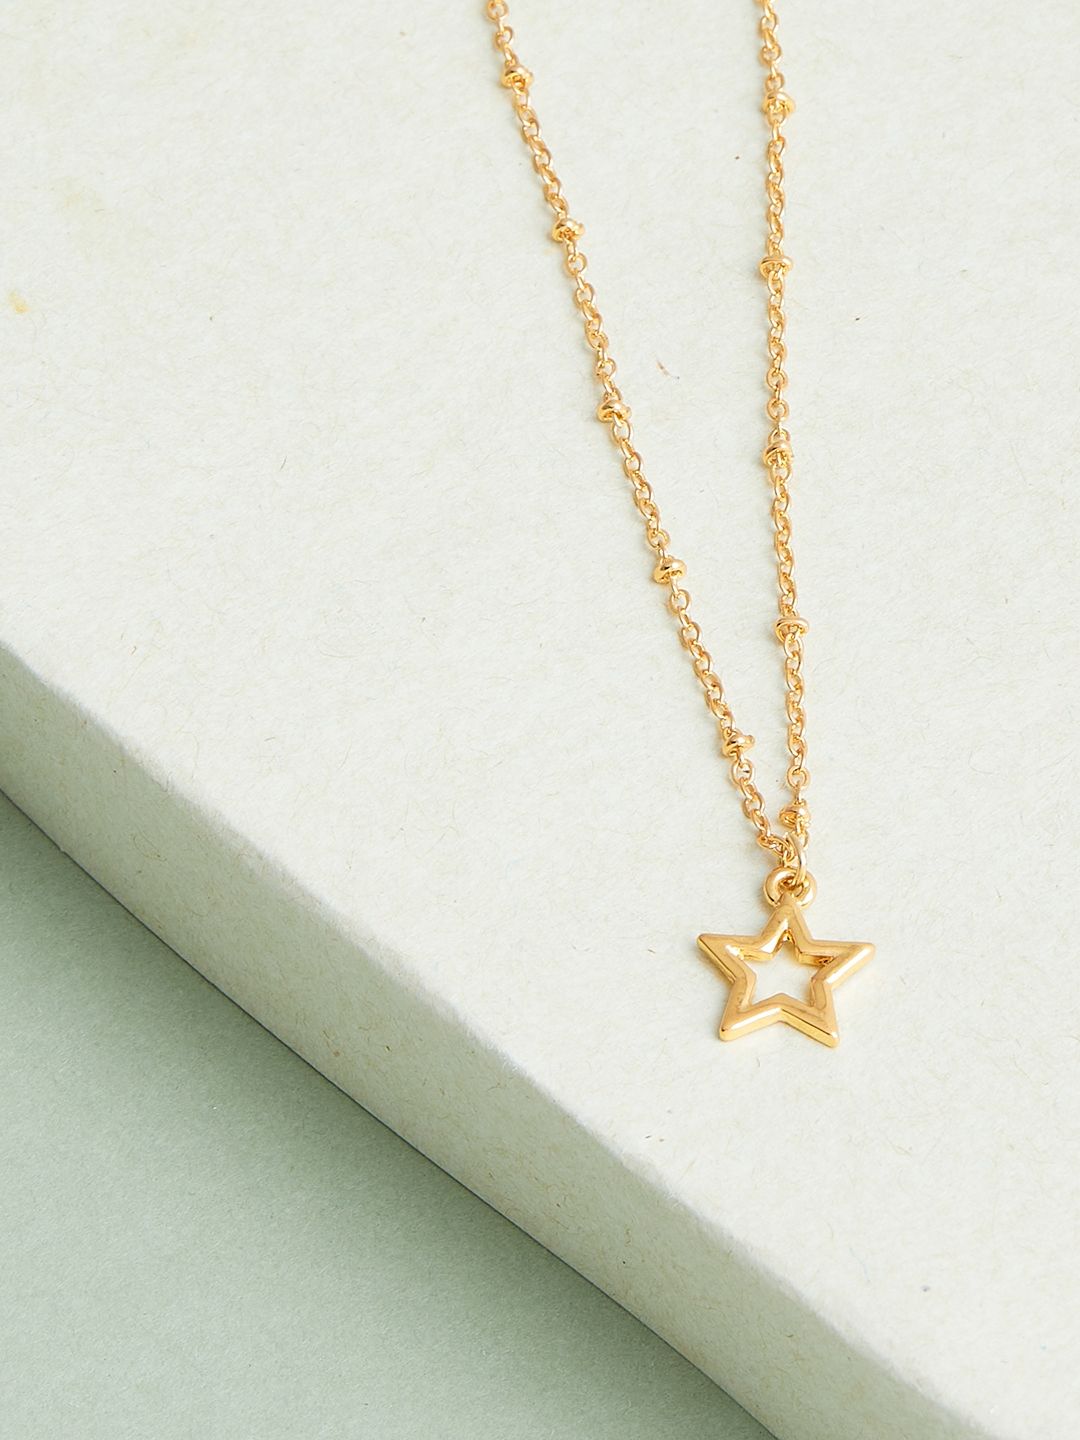 Lilly & sparkle Gold-Plated Chain With Star Pendant Price in India